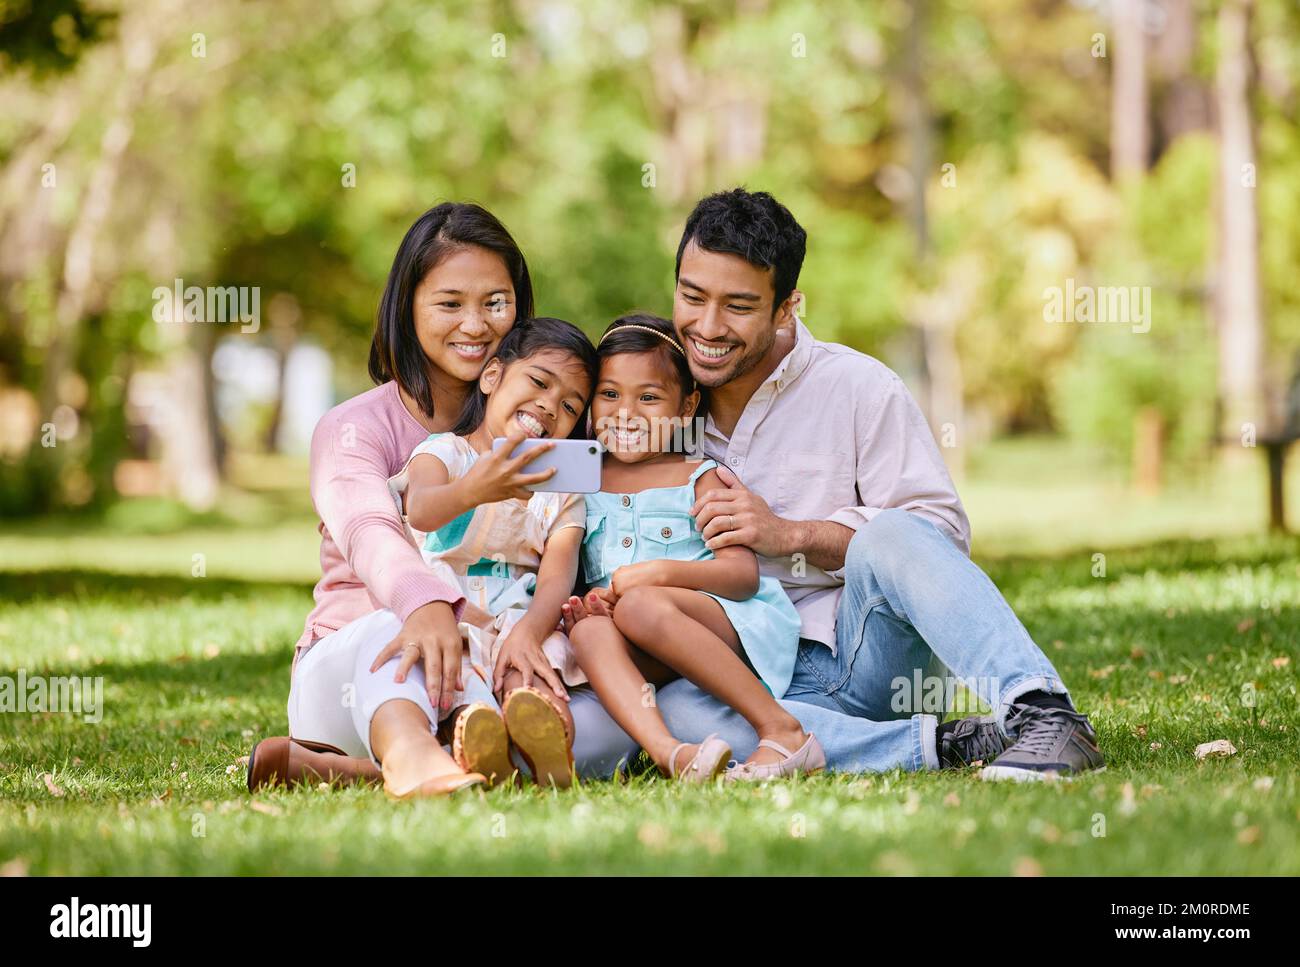 Happy asian family taking selfies on a cellphone in a park. Adorable little girls bonding with their parents outside. Full length husband and wife Stock Photo